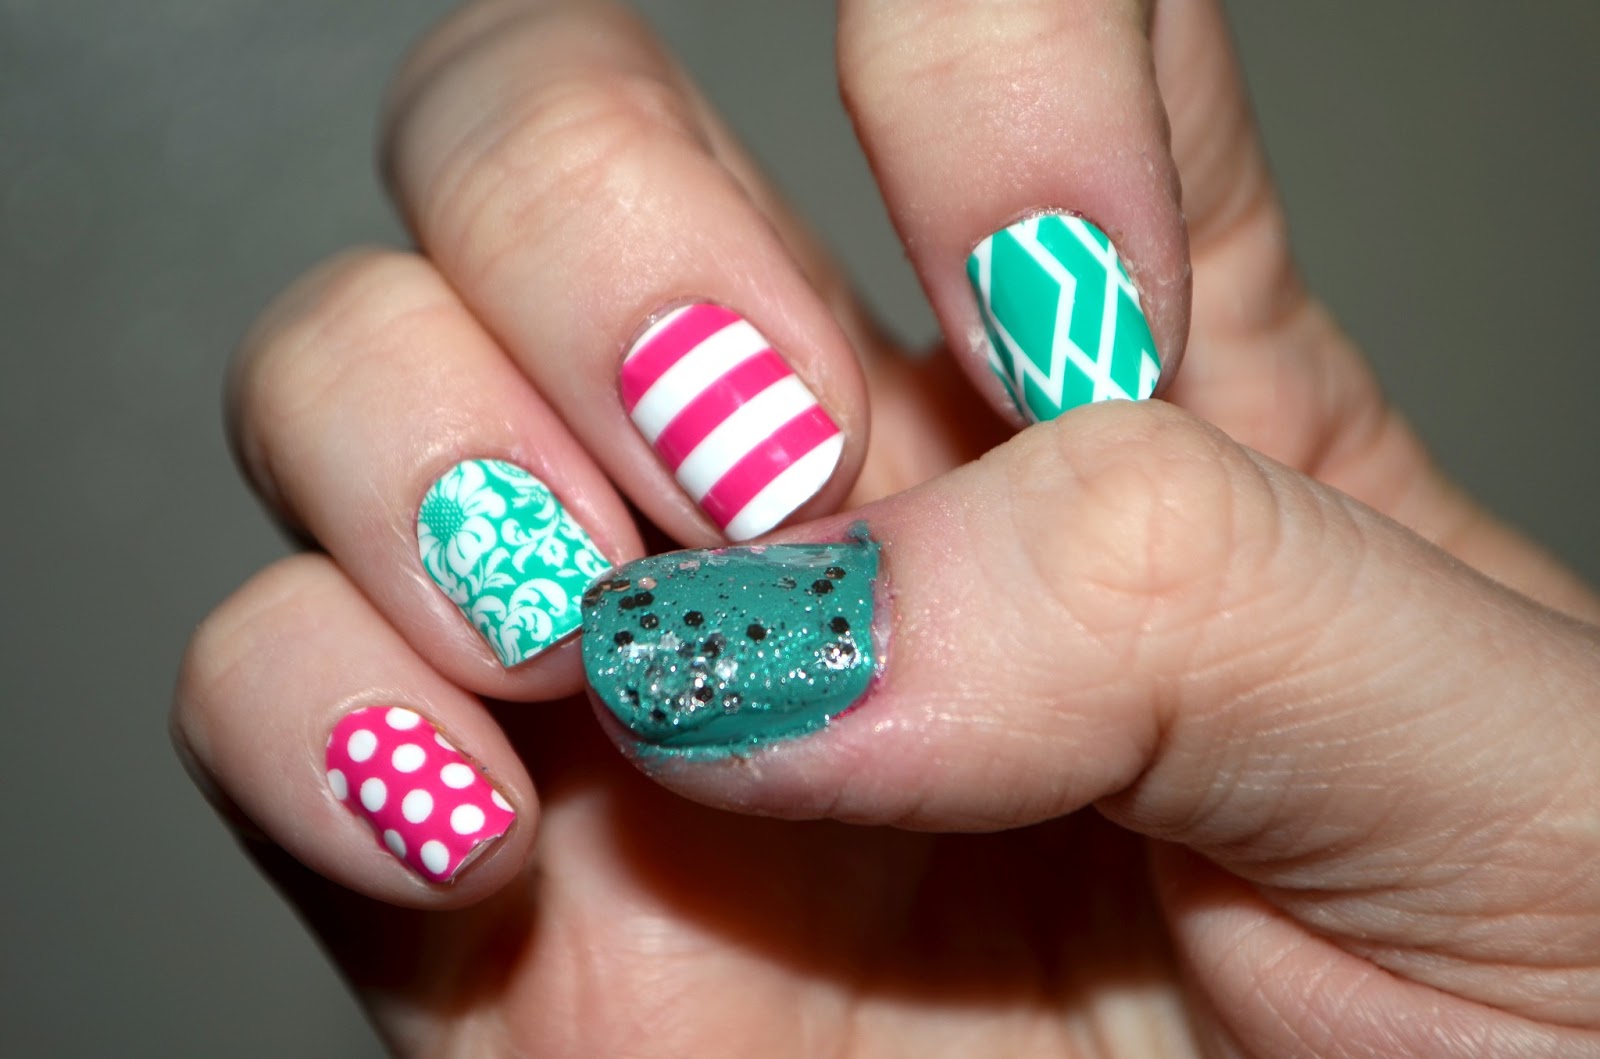 4. "Glittery Nail Art Stickers" by Jamberry - wide 2